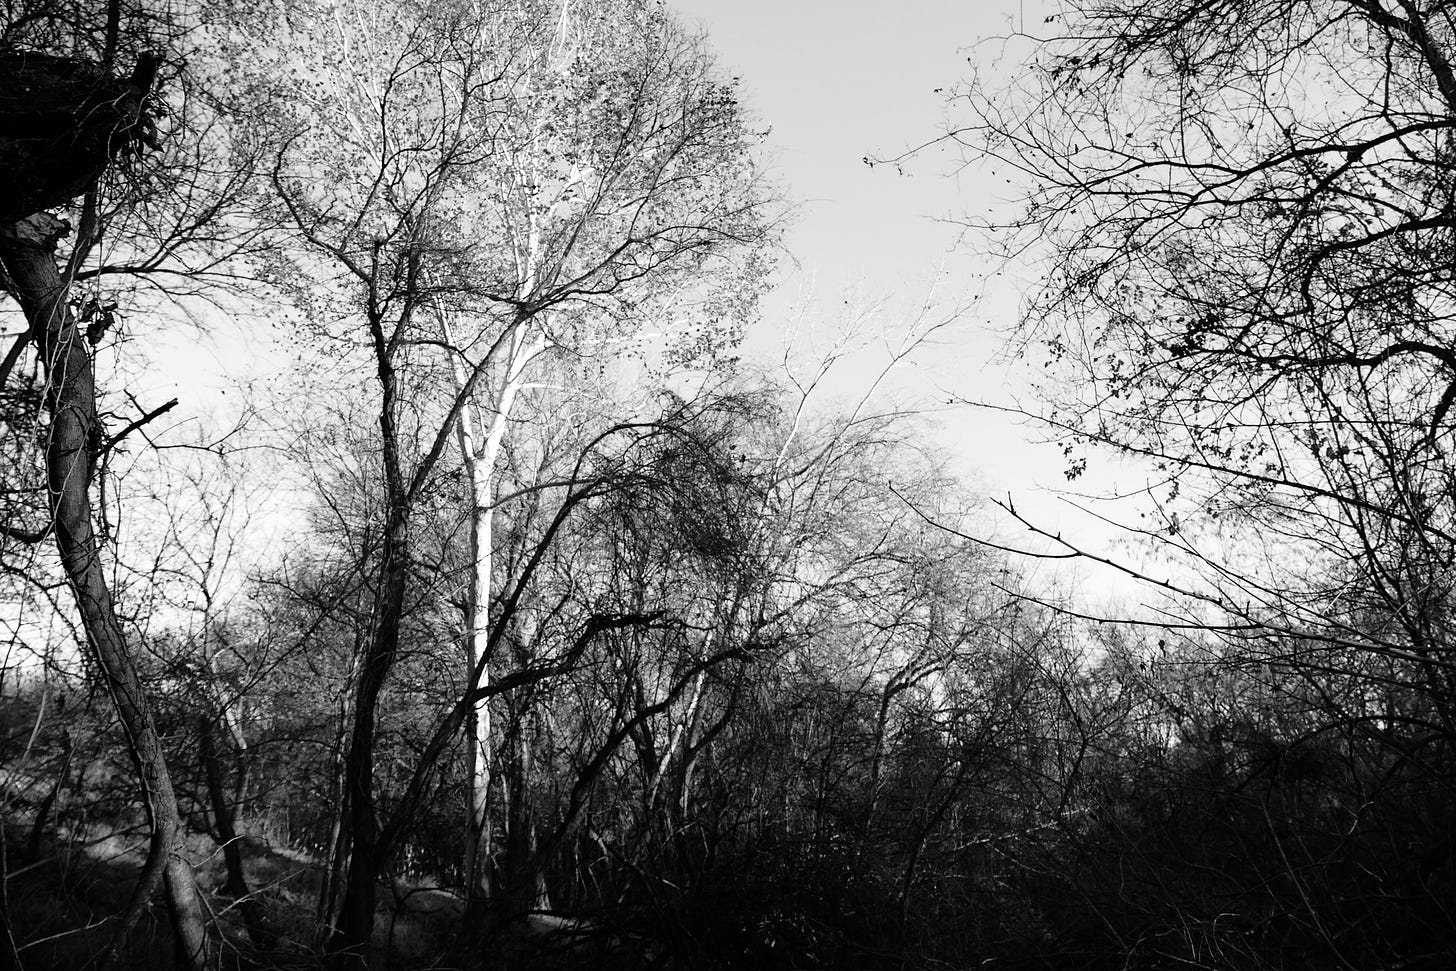 Black and white photo of a white bare sycamore in an otherwise dark forest